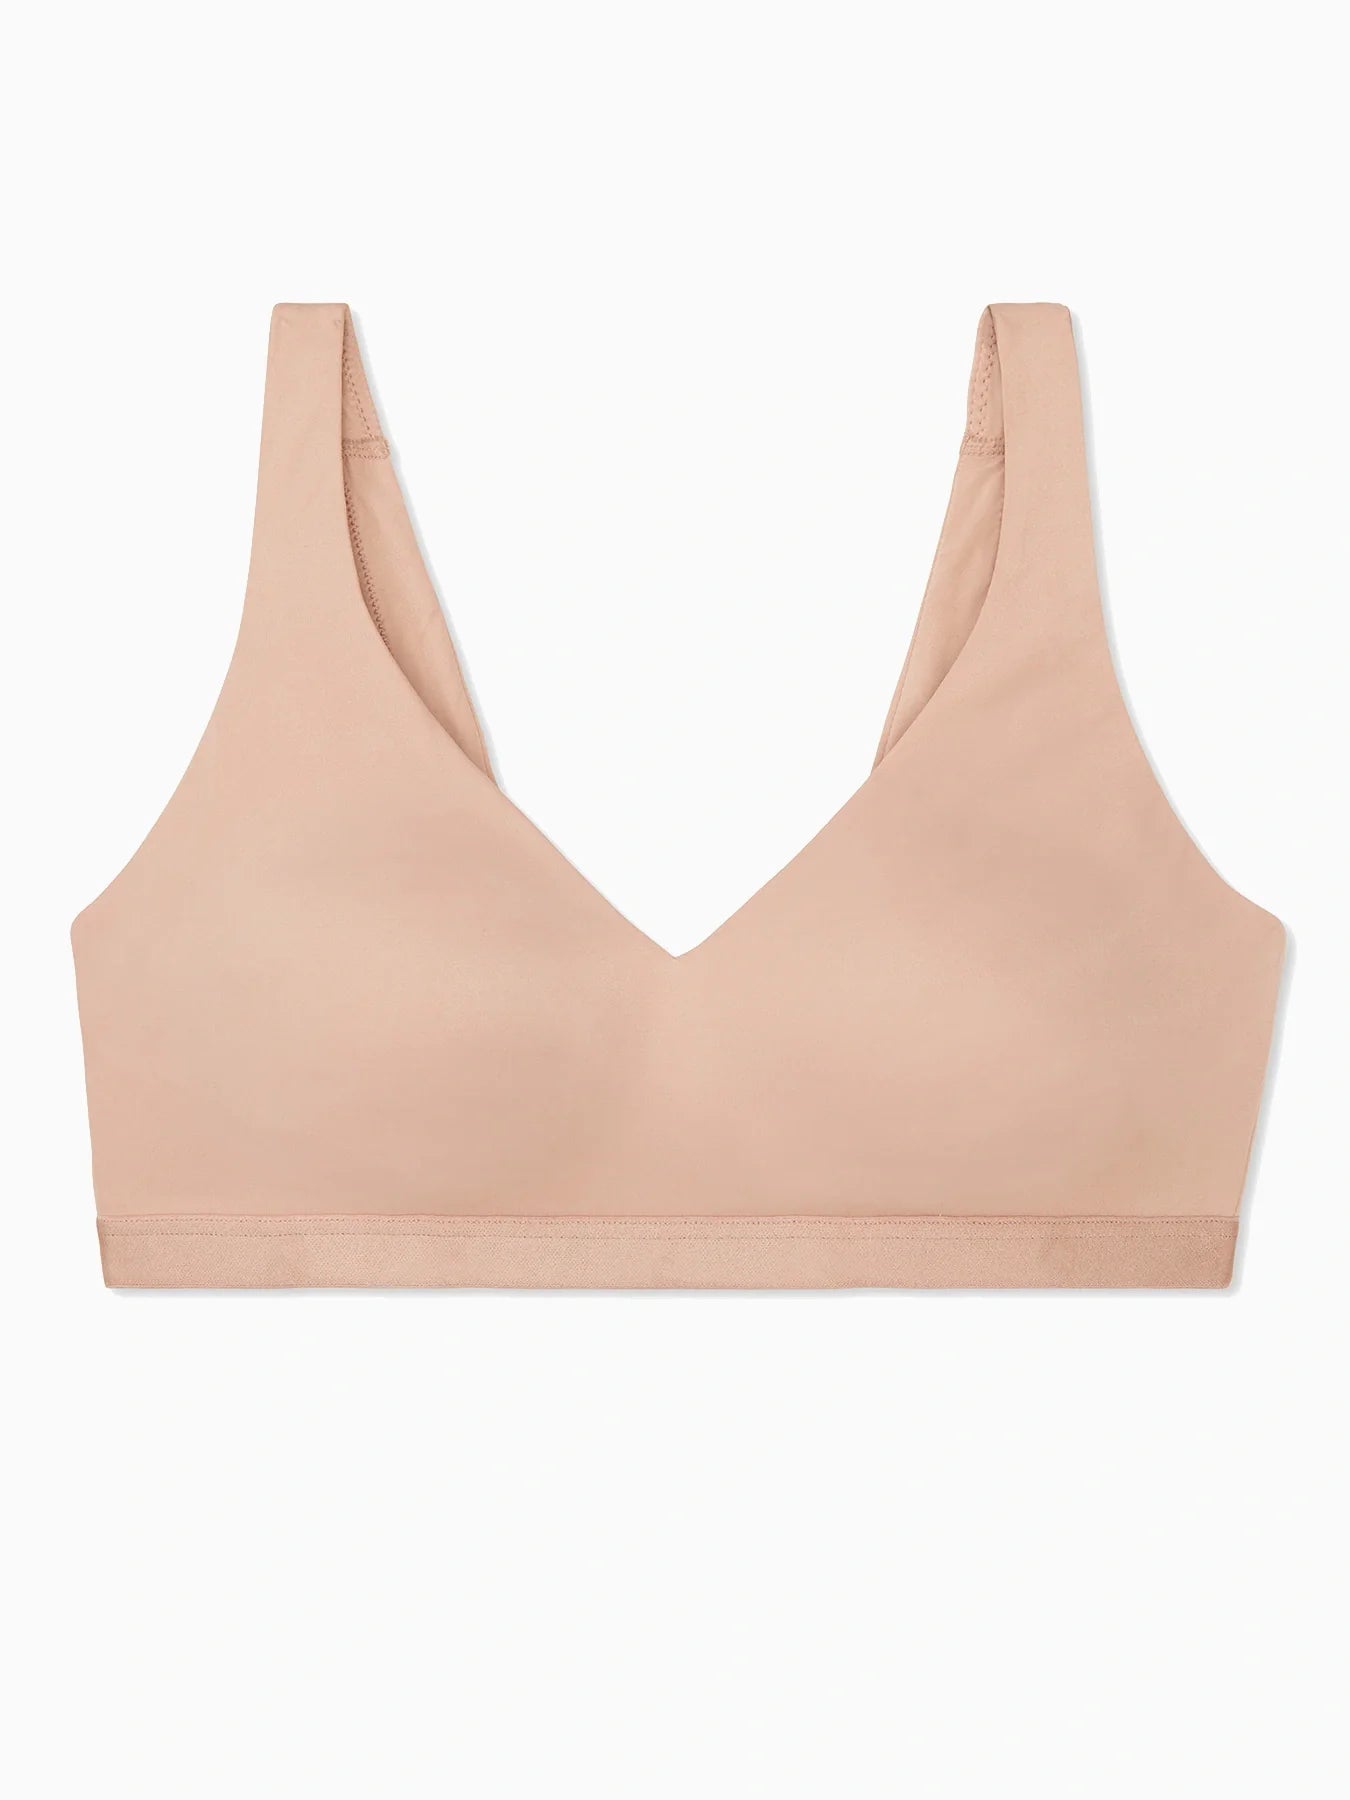 Cloud 9 Smooth Comfort Wireless T-shirt Bra RM1041C 200 - Toasted Almond